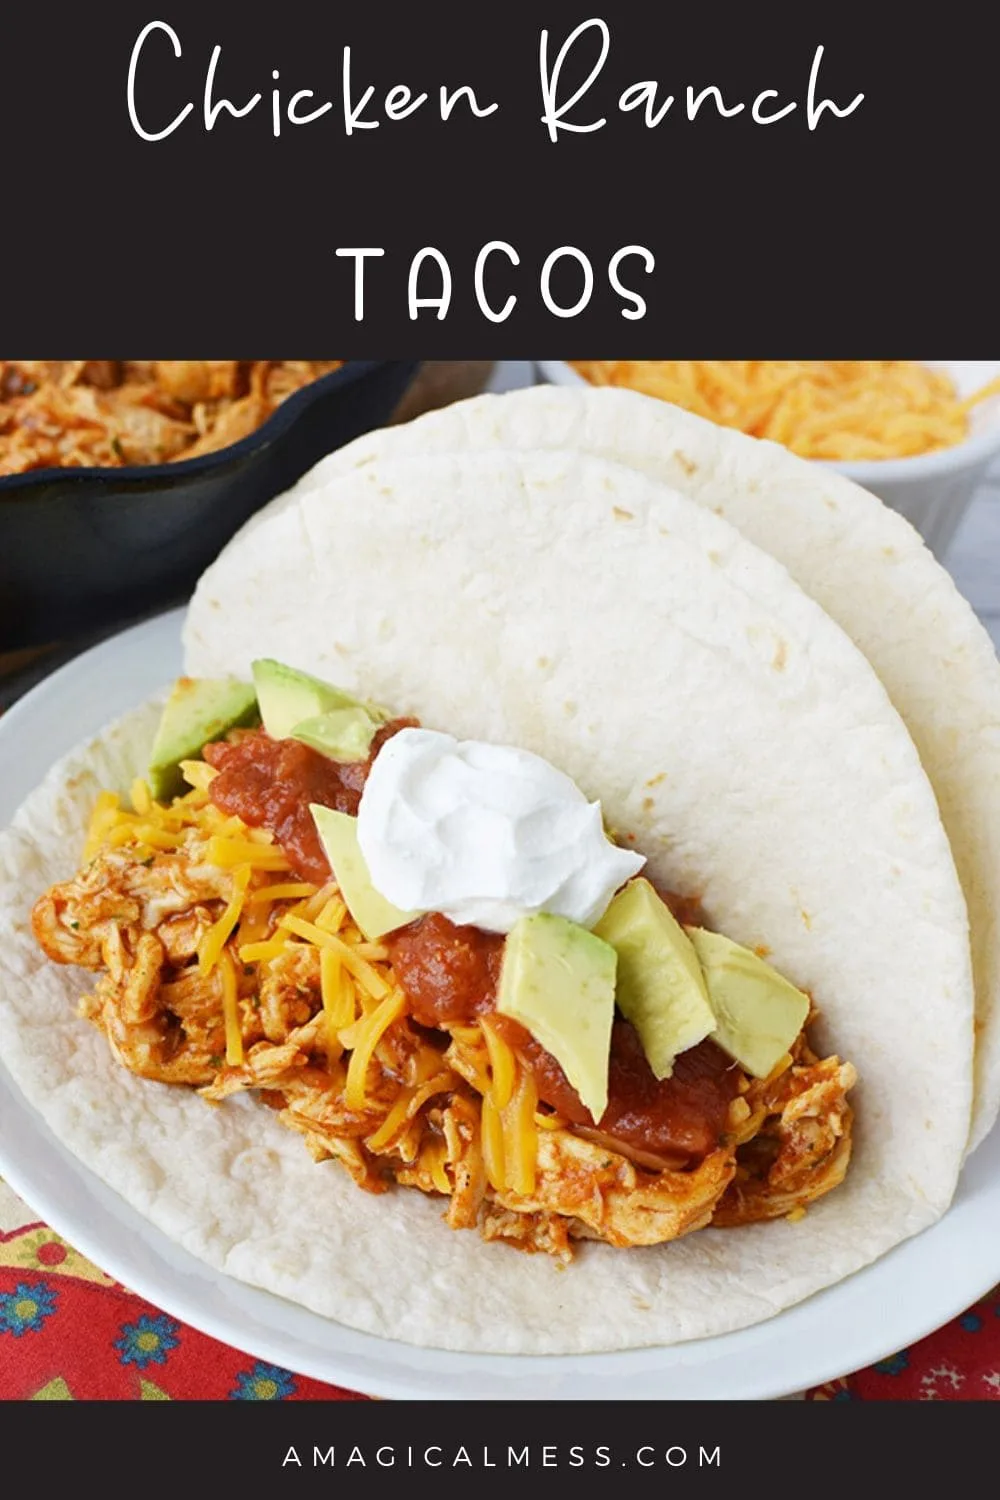 Shredded chicken taco with toppings on a plate